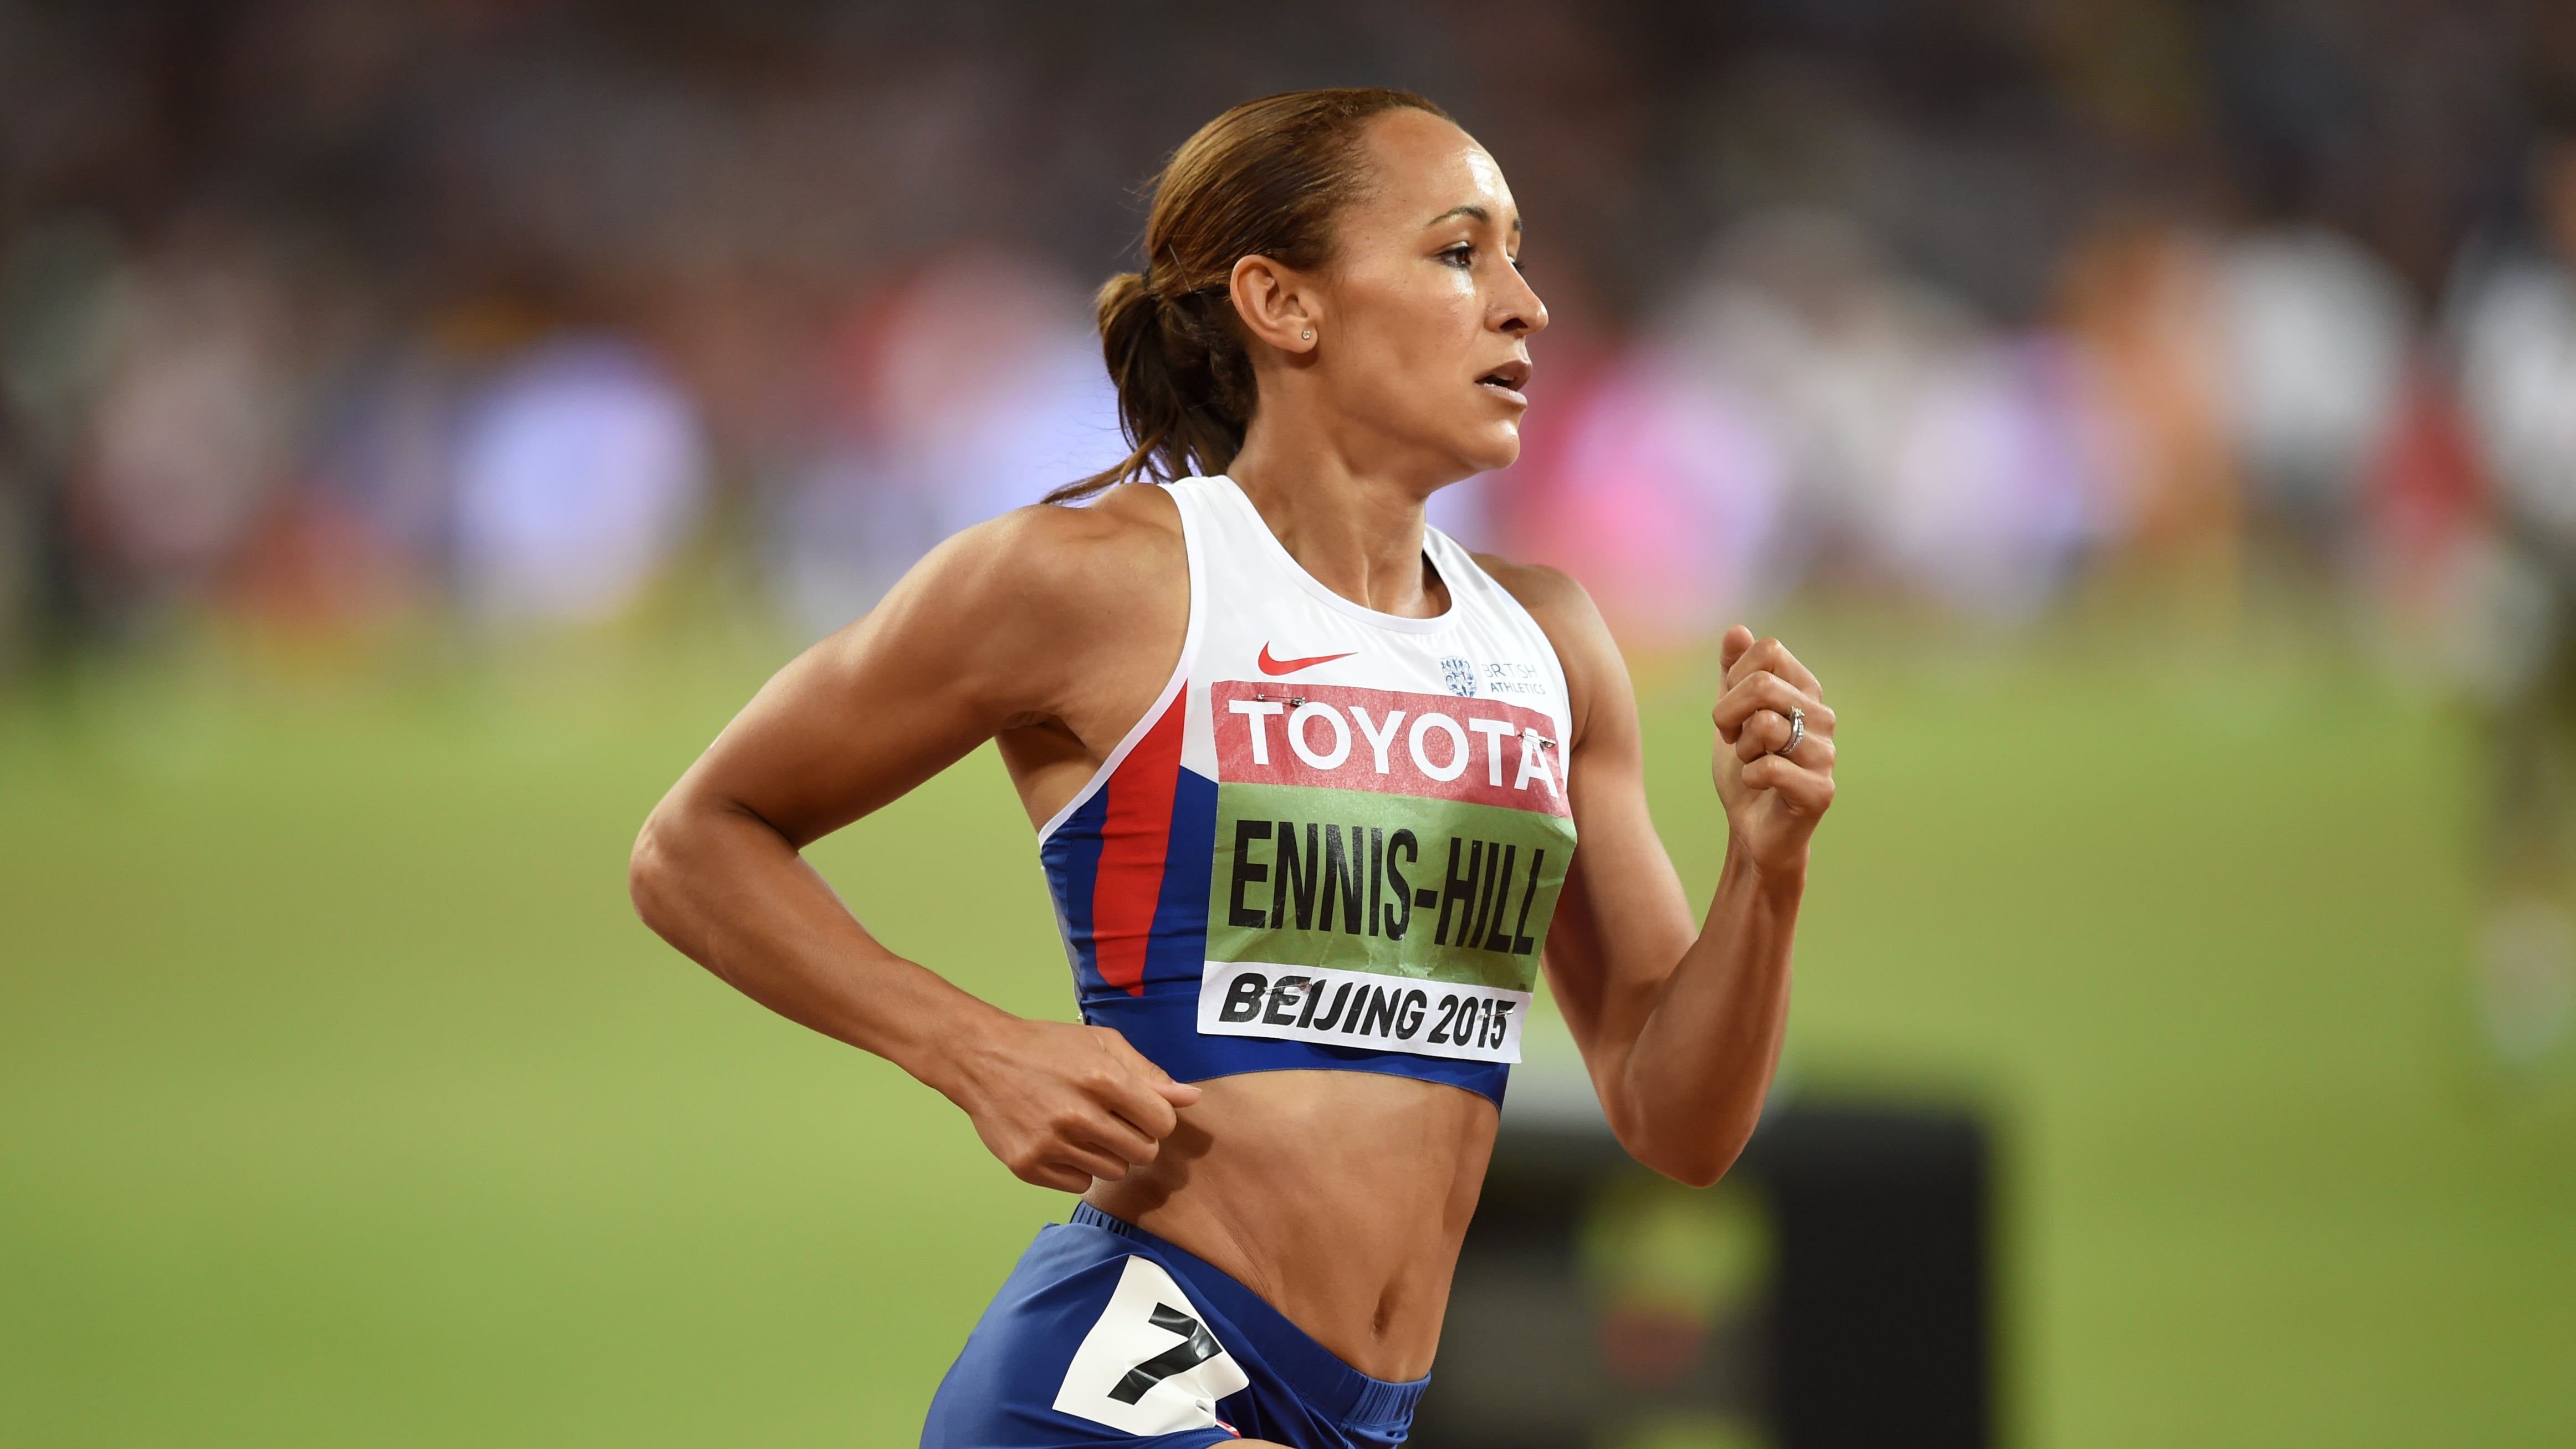 Jessica Ennis-Hill says there is still ‘a long way to go’ towards gender equality